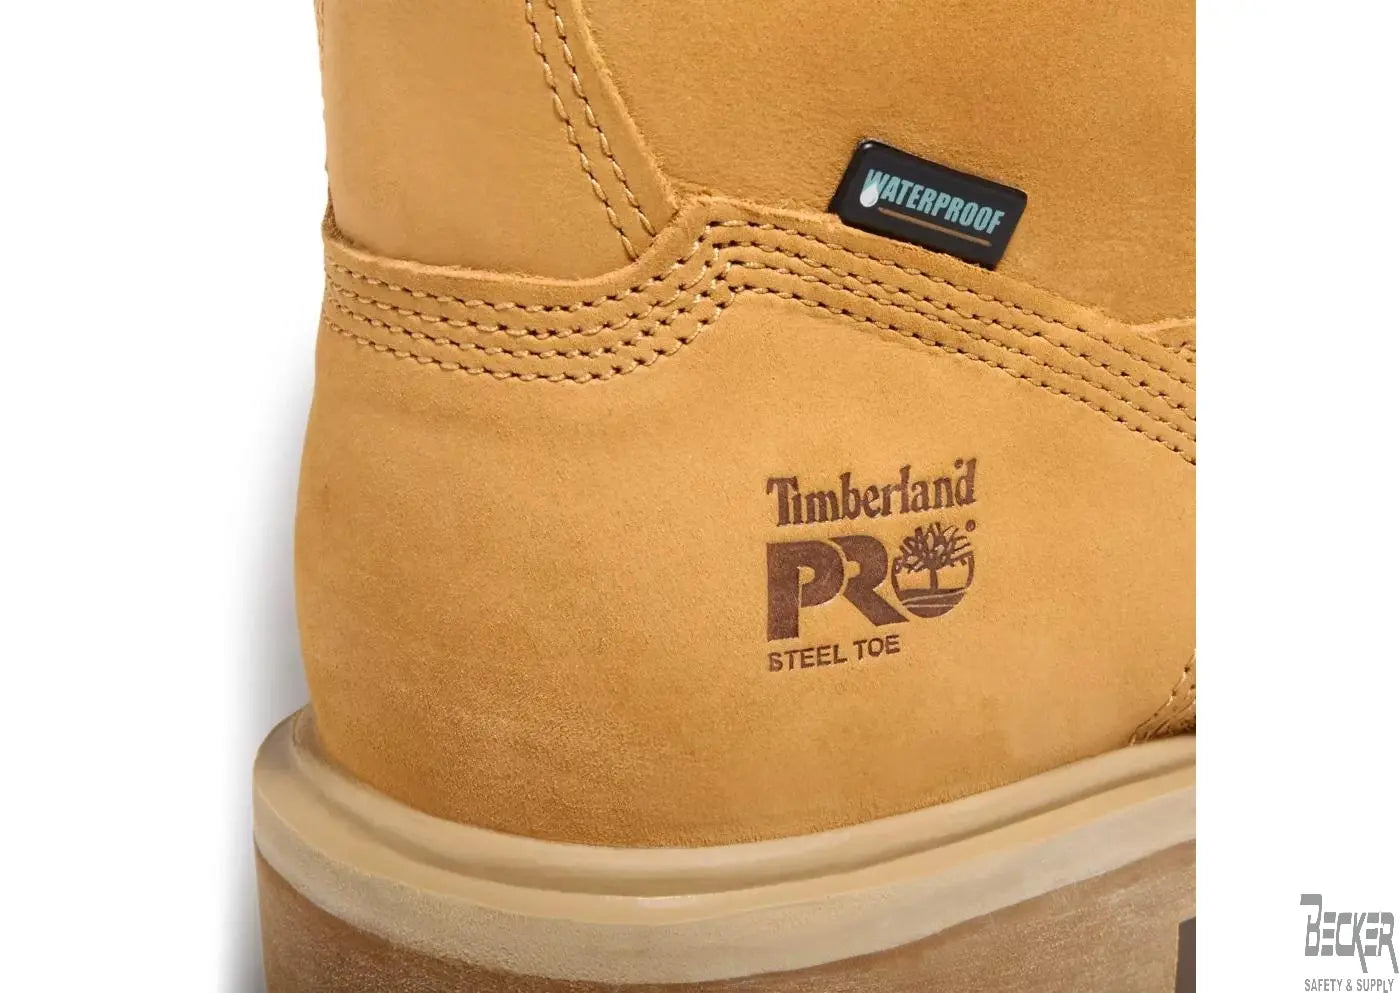 TIMBERLAND PRO - Men's Direct Attach 6" Steel Toe Waterproof Work Boot - Becker Safety and Supply